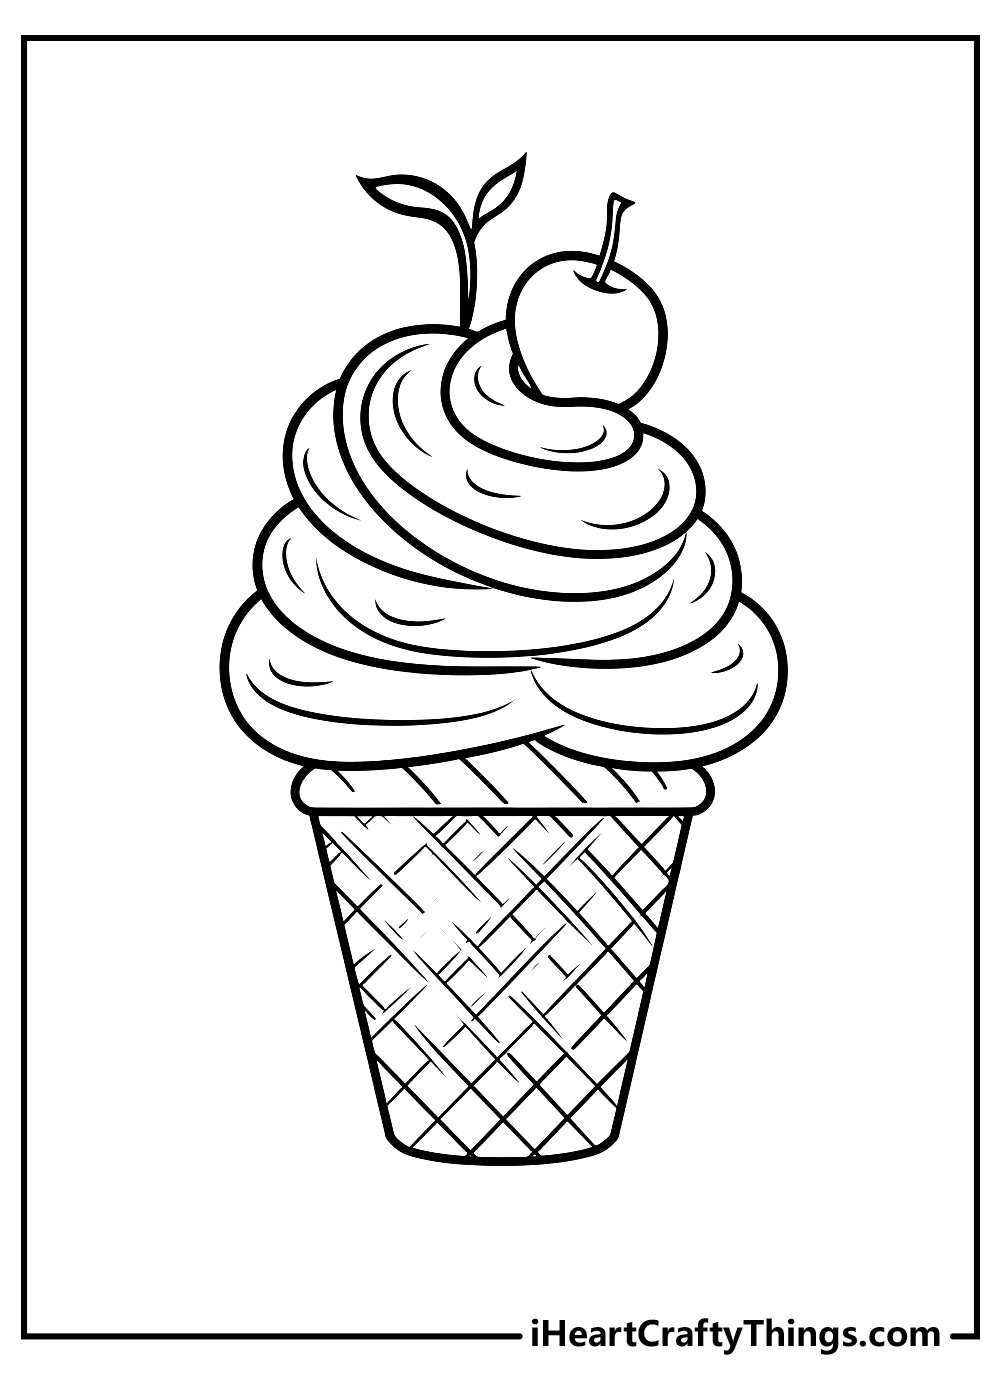 black-and-white ice cream coloring pages